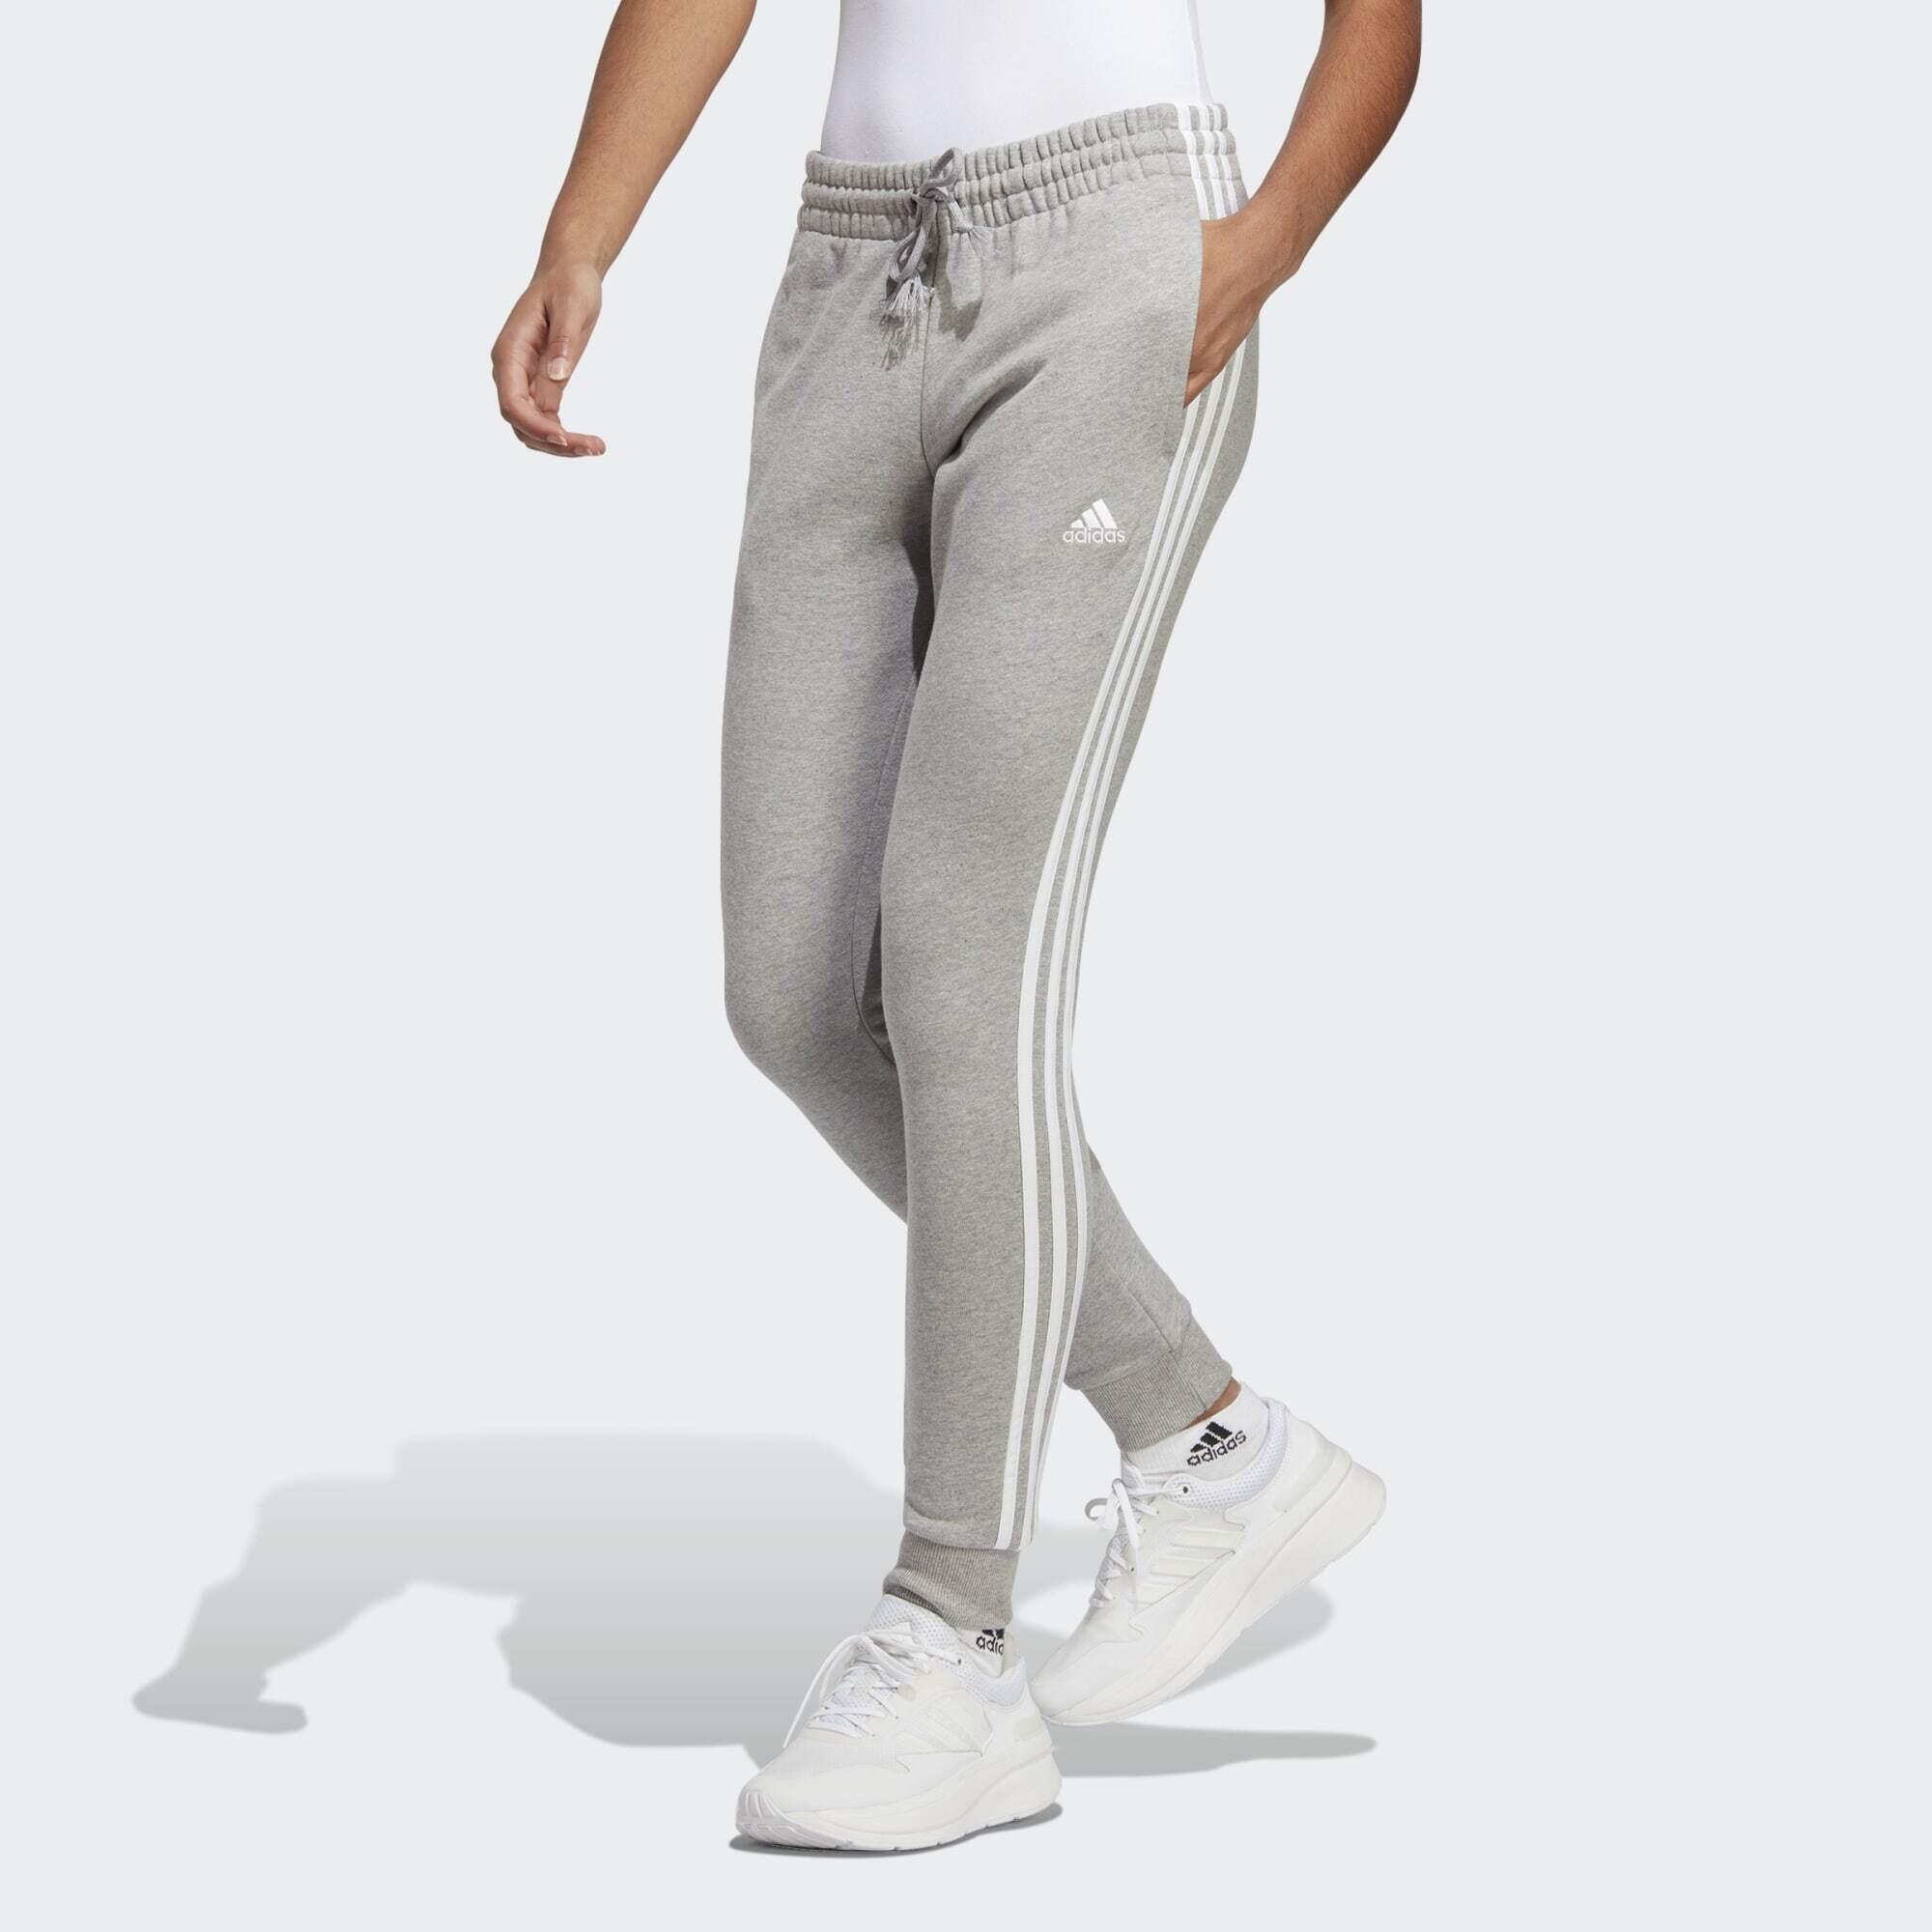 ADIDAS Essentials 3-Stripes French Terry Cuffed Pants